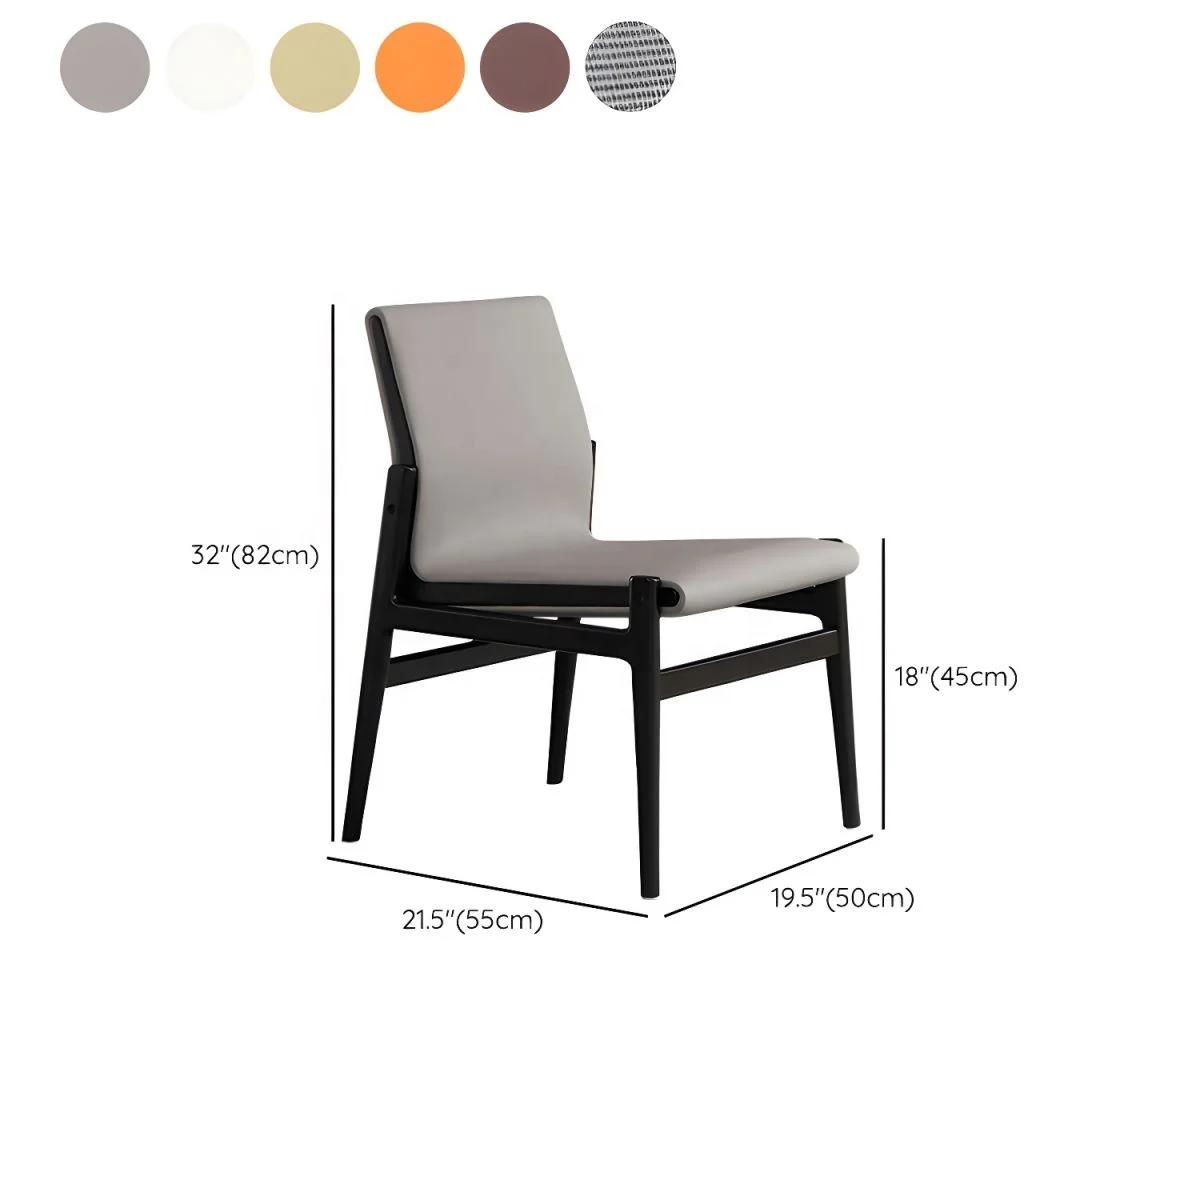 NOVA Outdoor Without Arm Leisure Coffee Chairs Leather Seat Scandinavian Chair For Dining Room